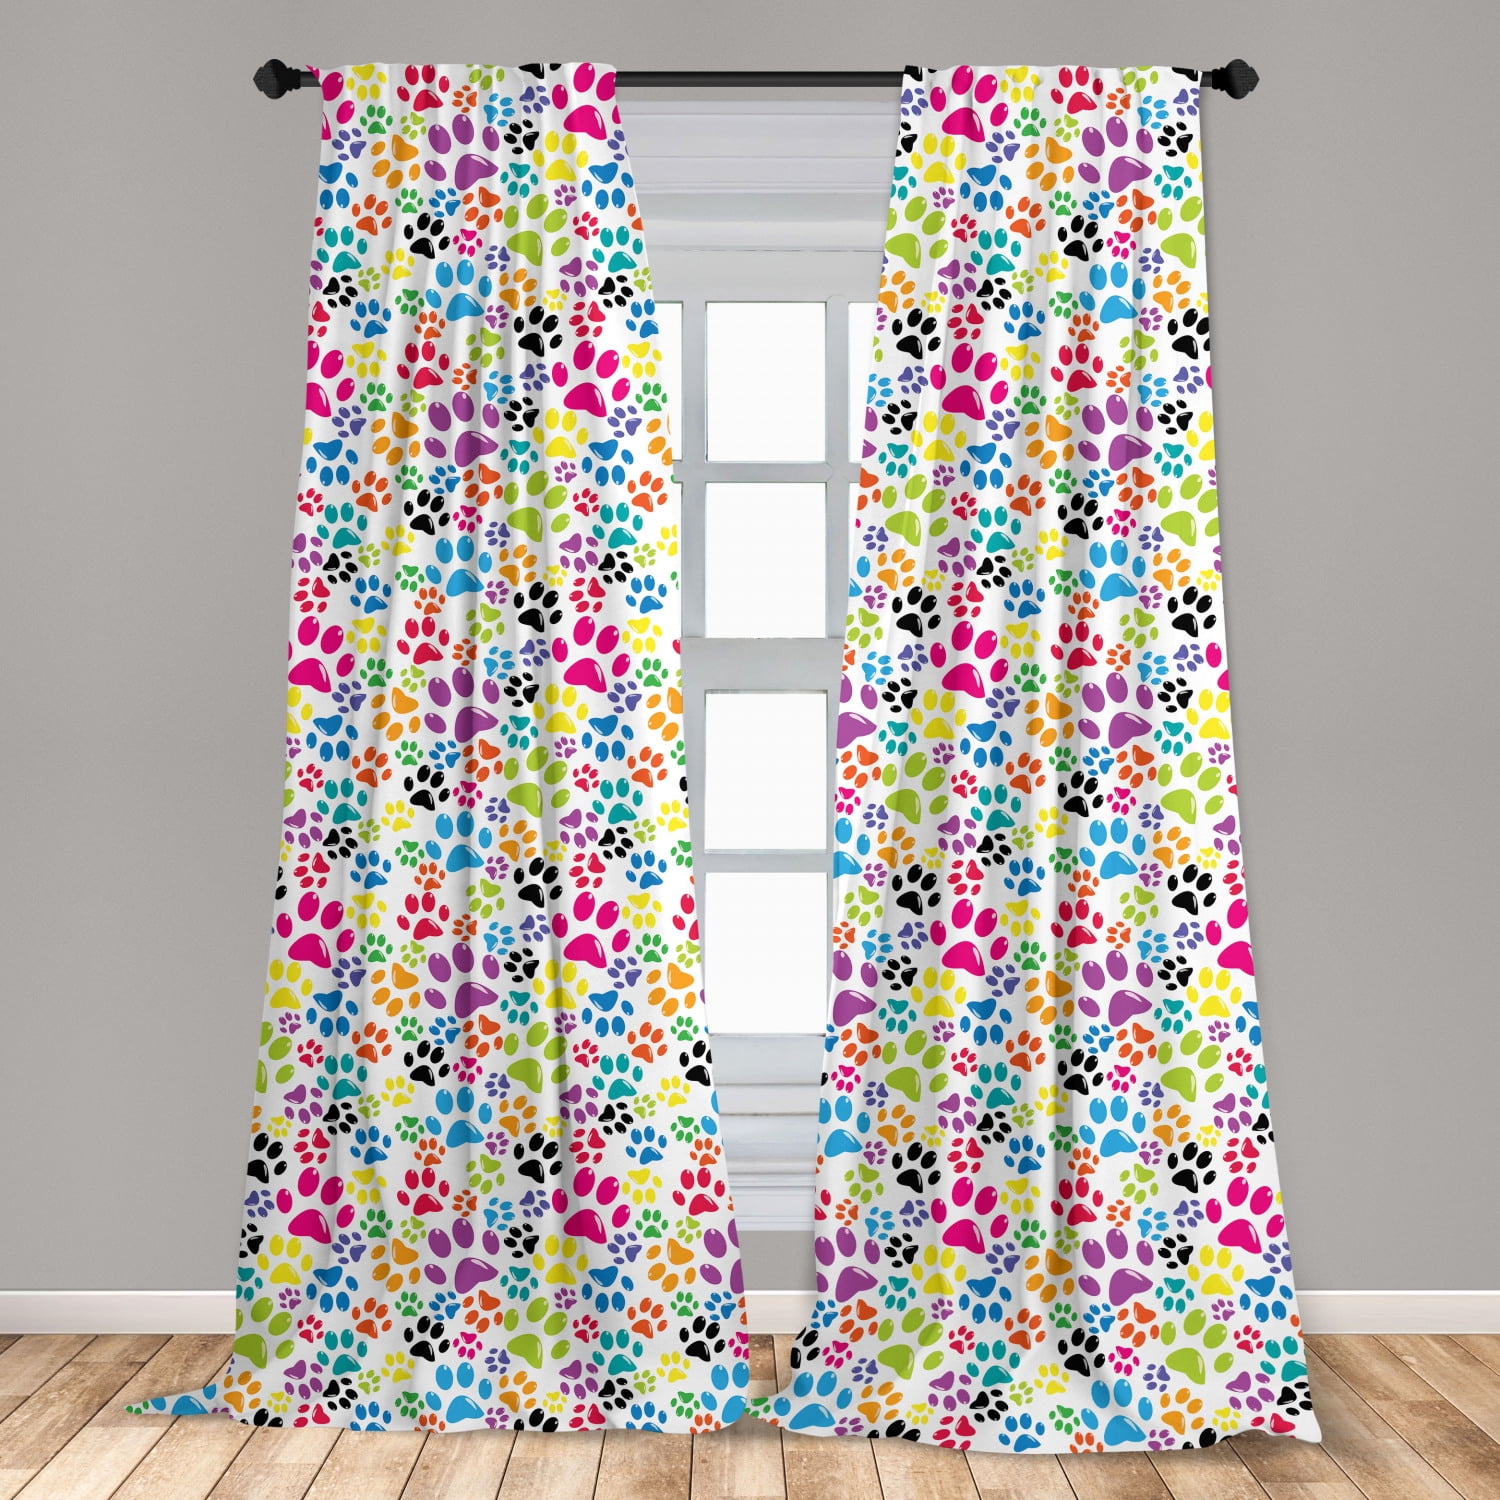 Home Privacy Protected Microfiber Window Curtains in 4 Sizes by Ambesonne 